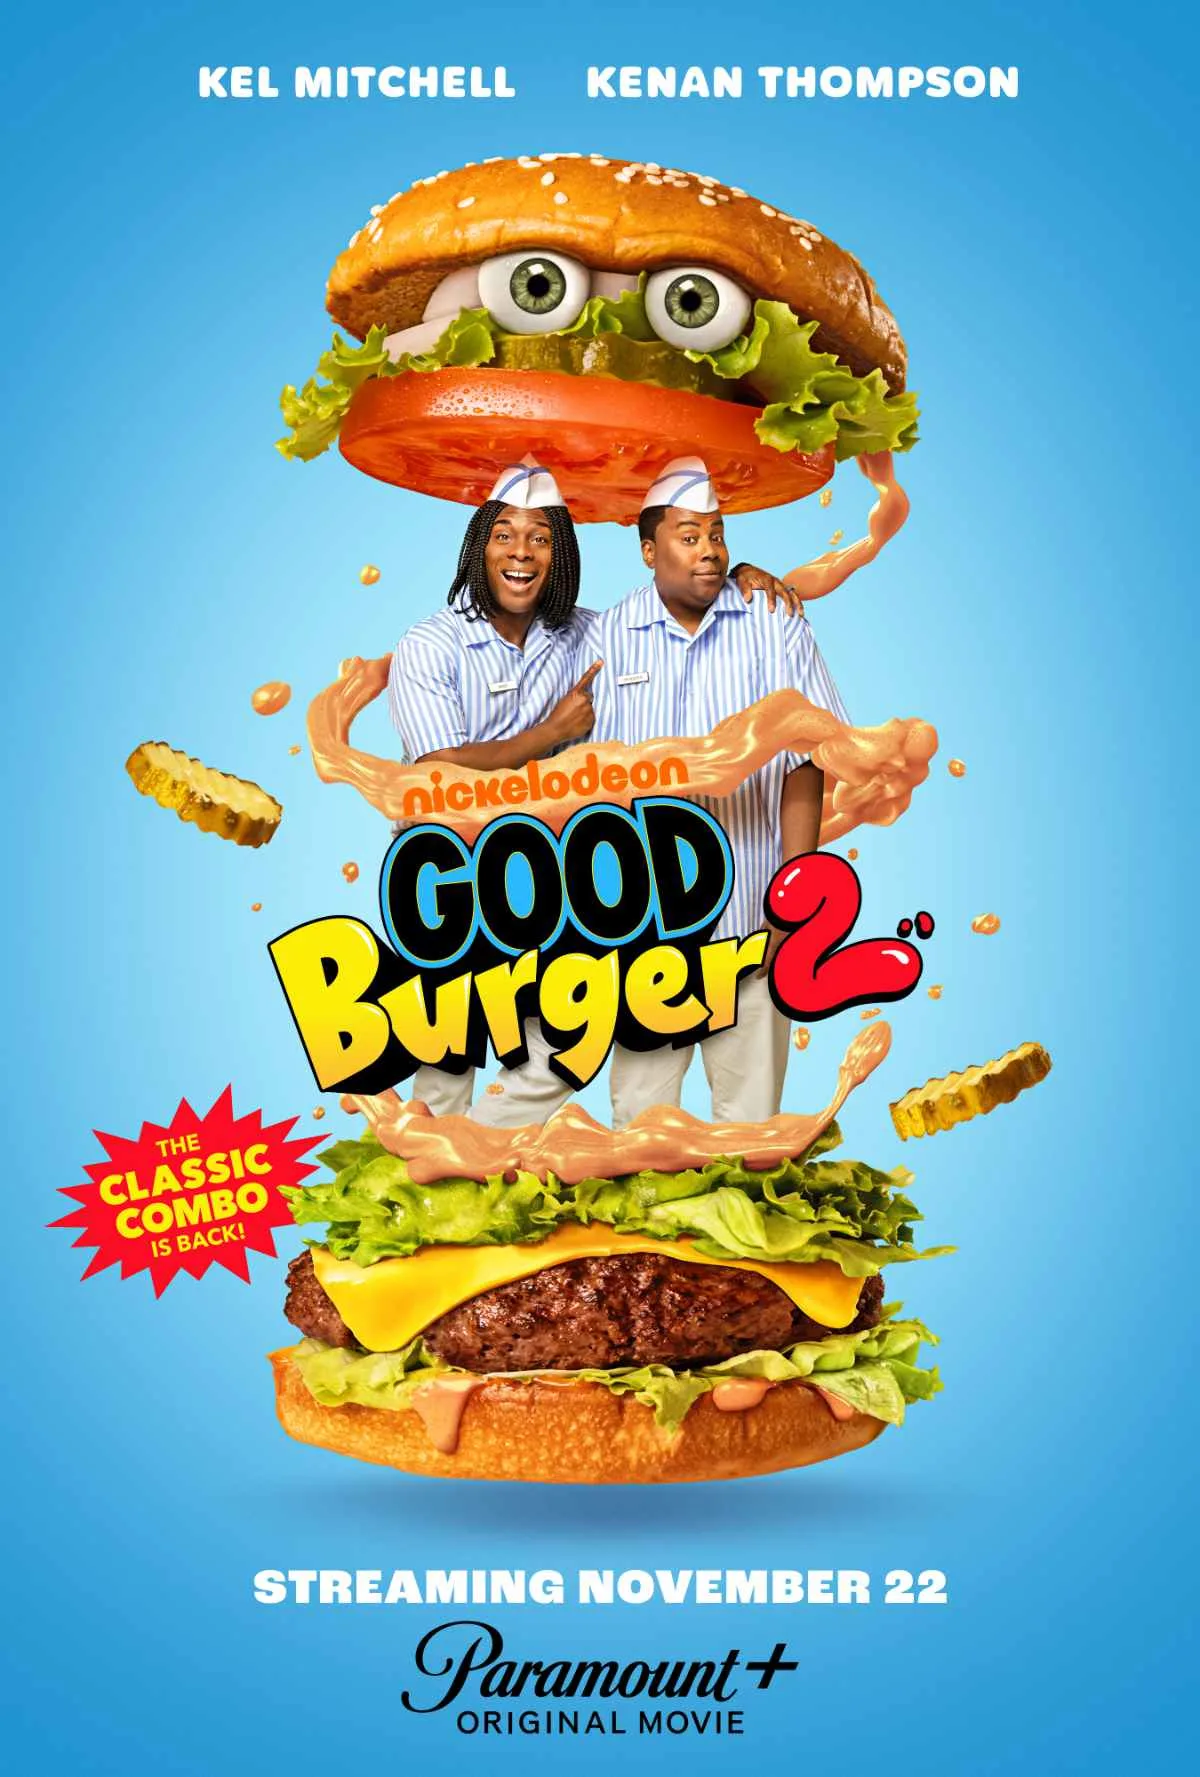 Good Burger 2 Trailer and Photos Released